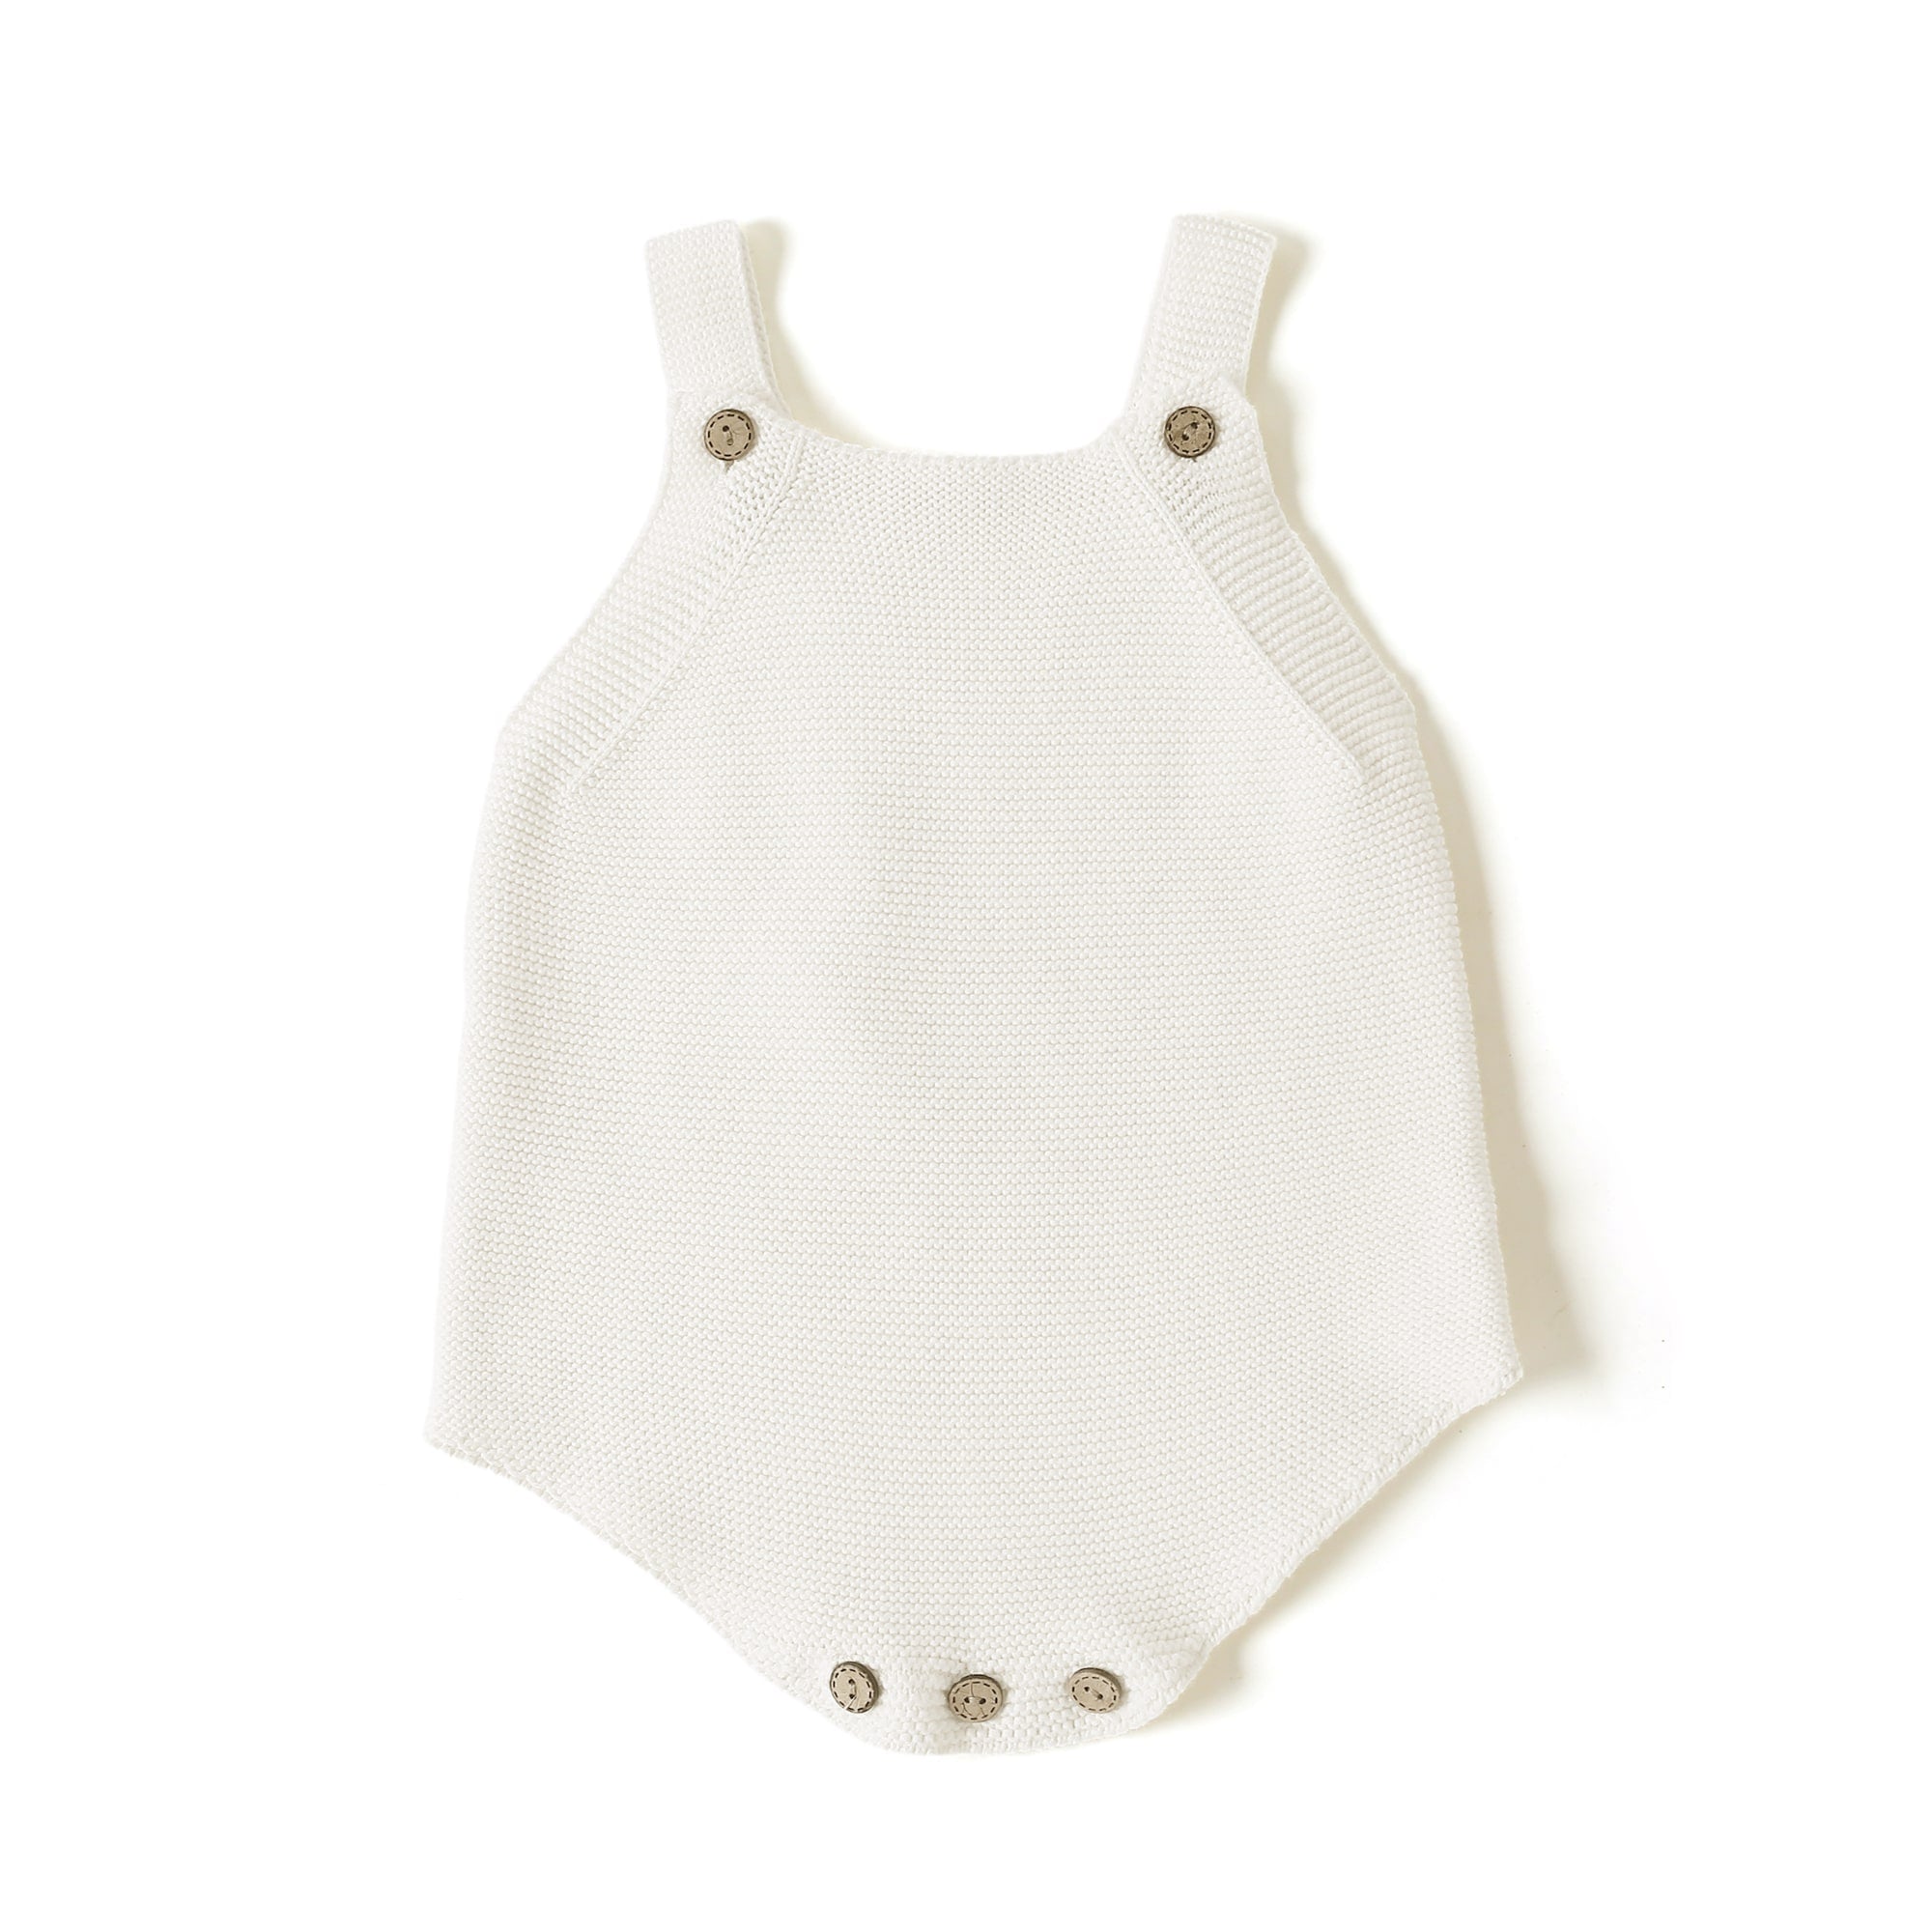 Adriatic Knitted Romper - Baby Rompers at Louie Meets Lola